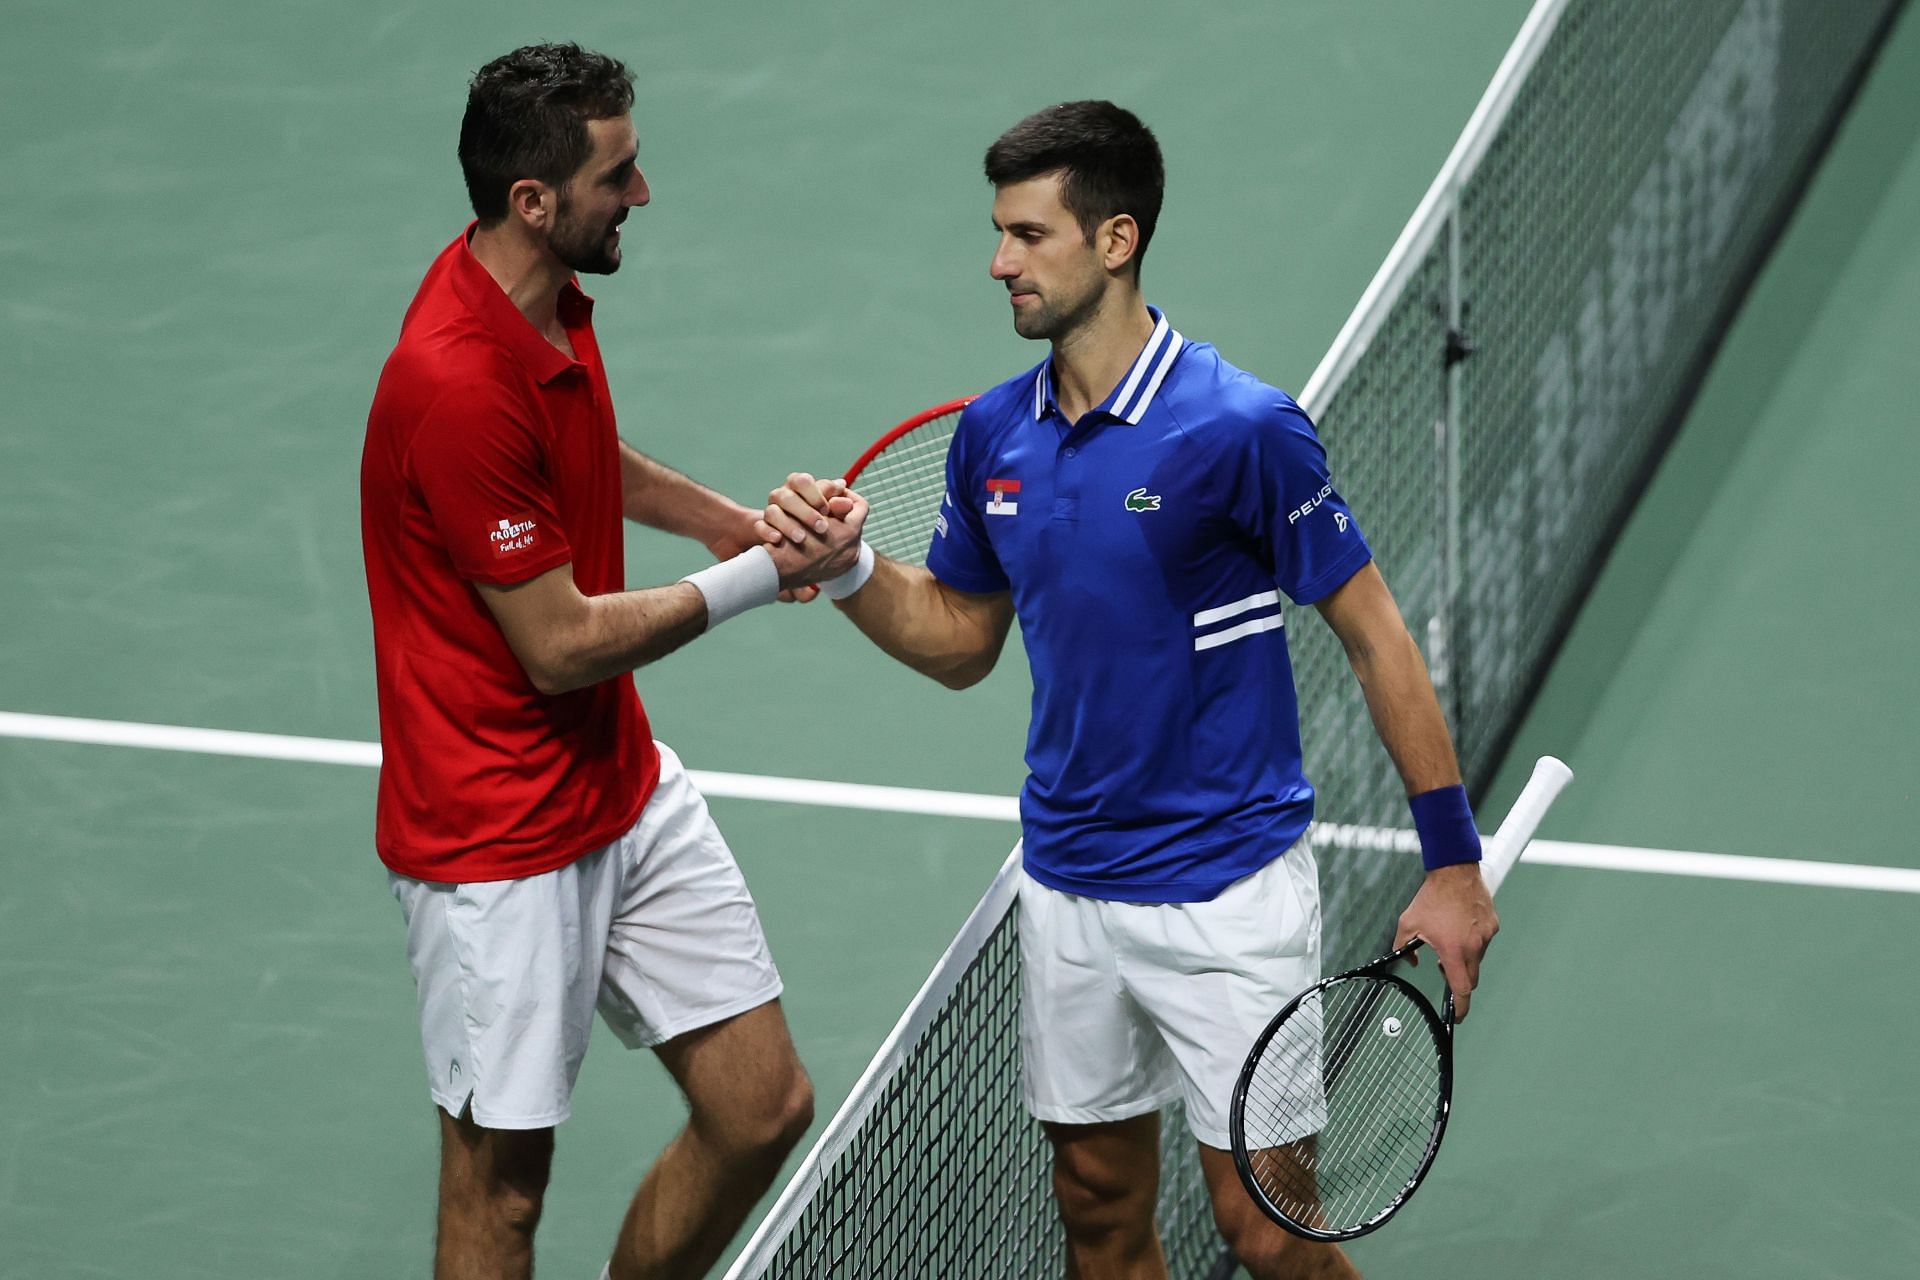 Marin Cilic and Novak Djokovic shake hands after their match at the Davis Cup Finals 2021